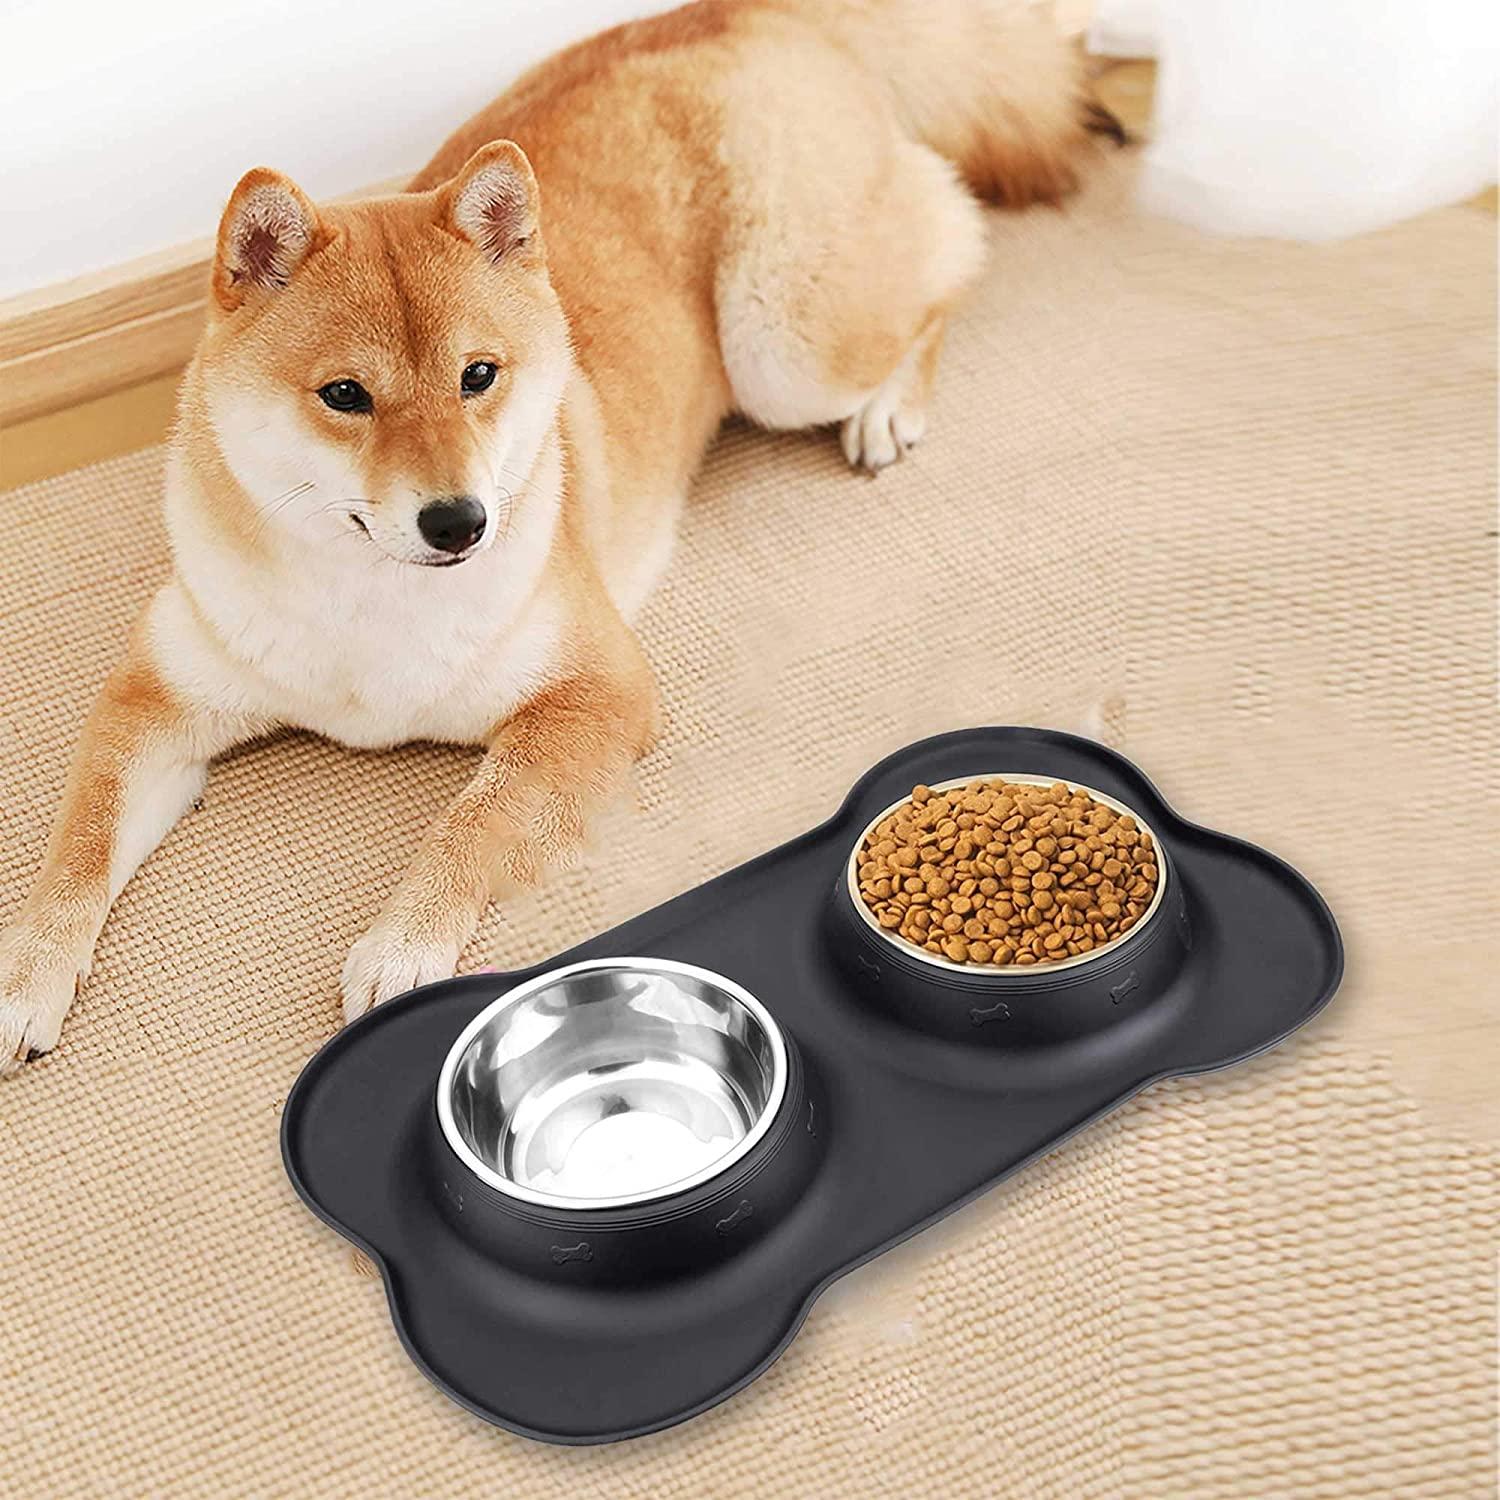 Dog Bowls Double Dog Water and Food Bowls Stainless Steel Bowls